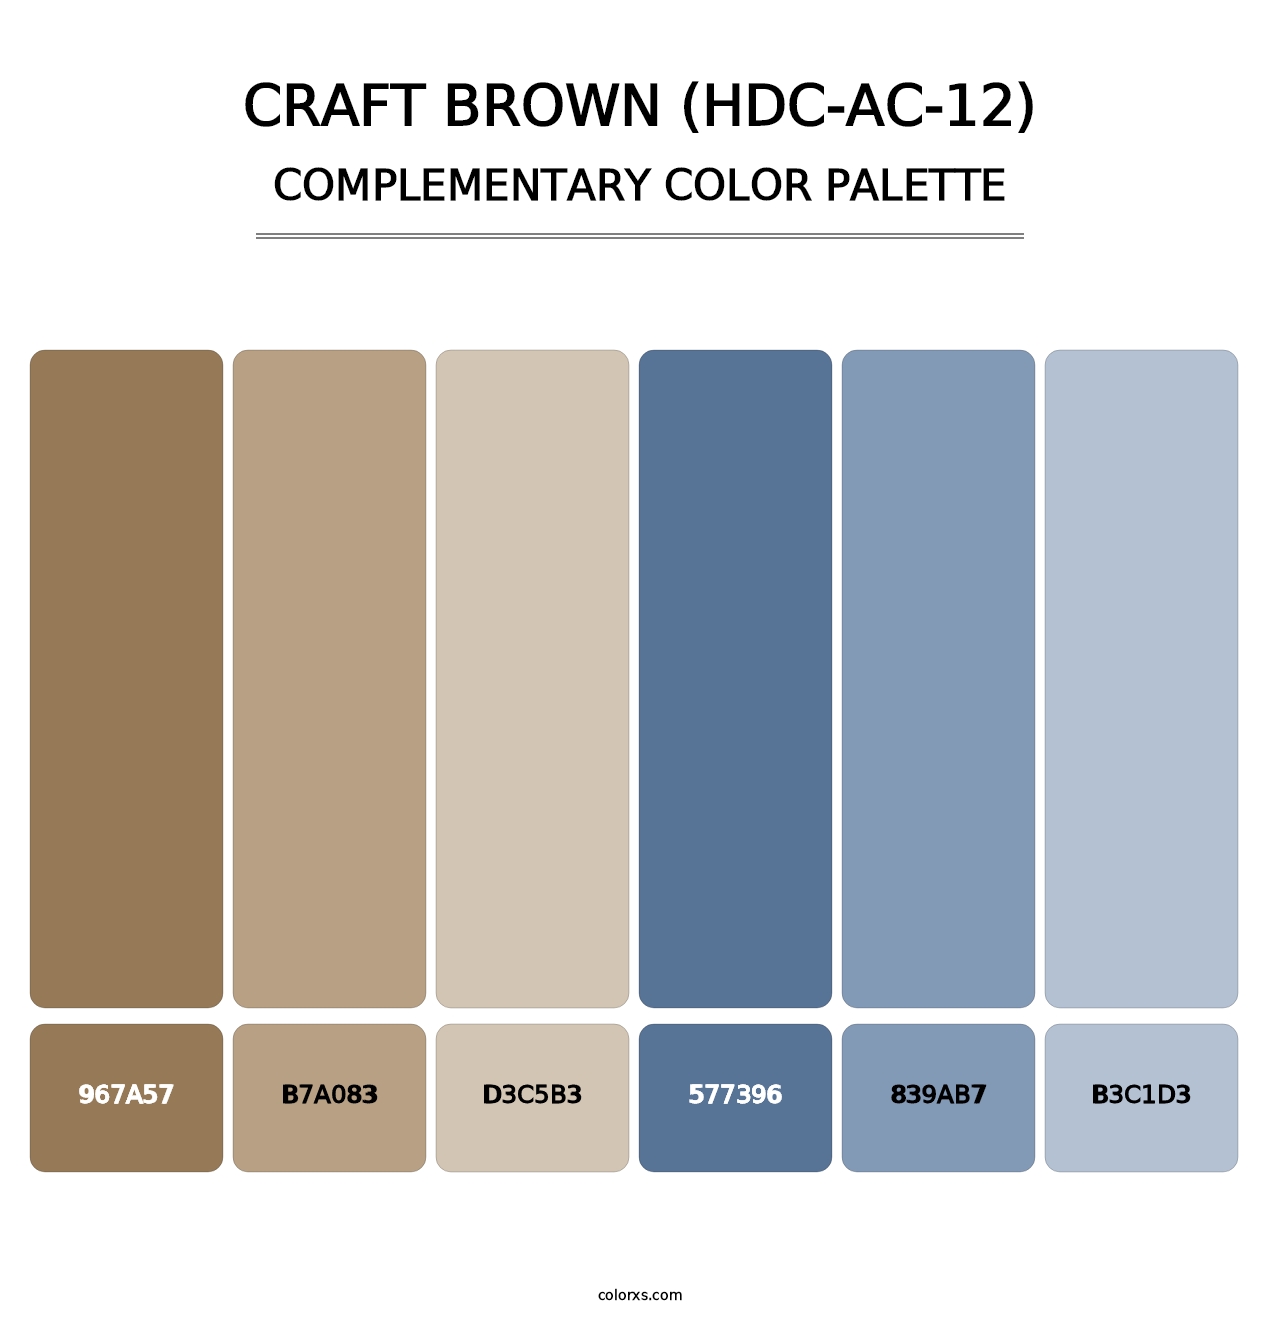 Craft Brown (HDC-AC-12) - Complementary Color Palette